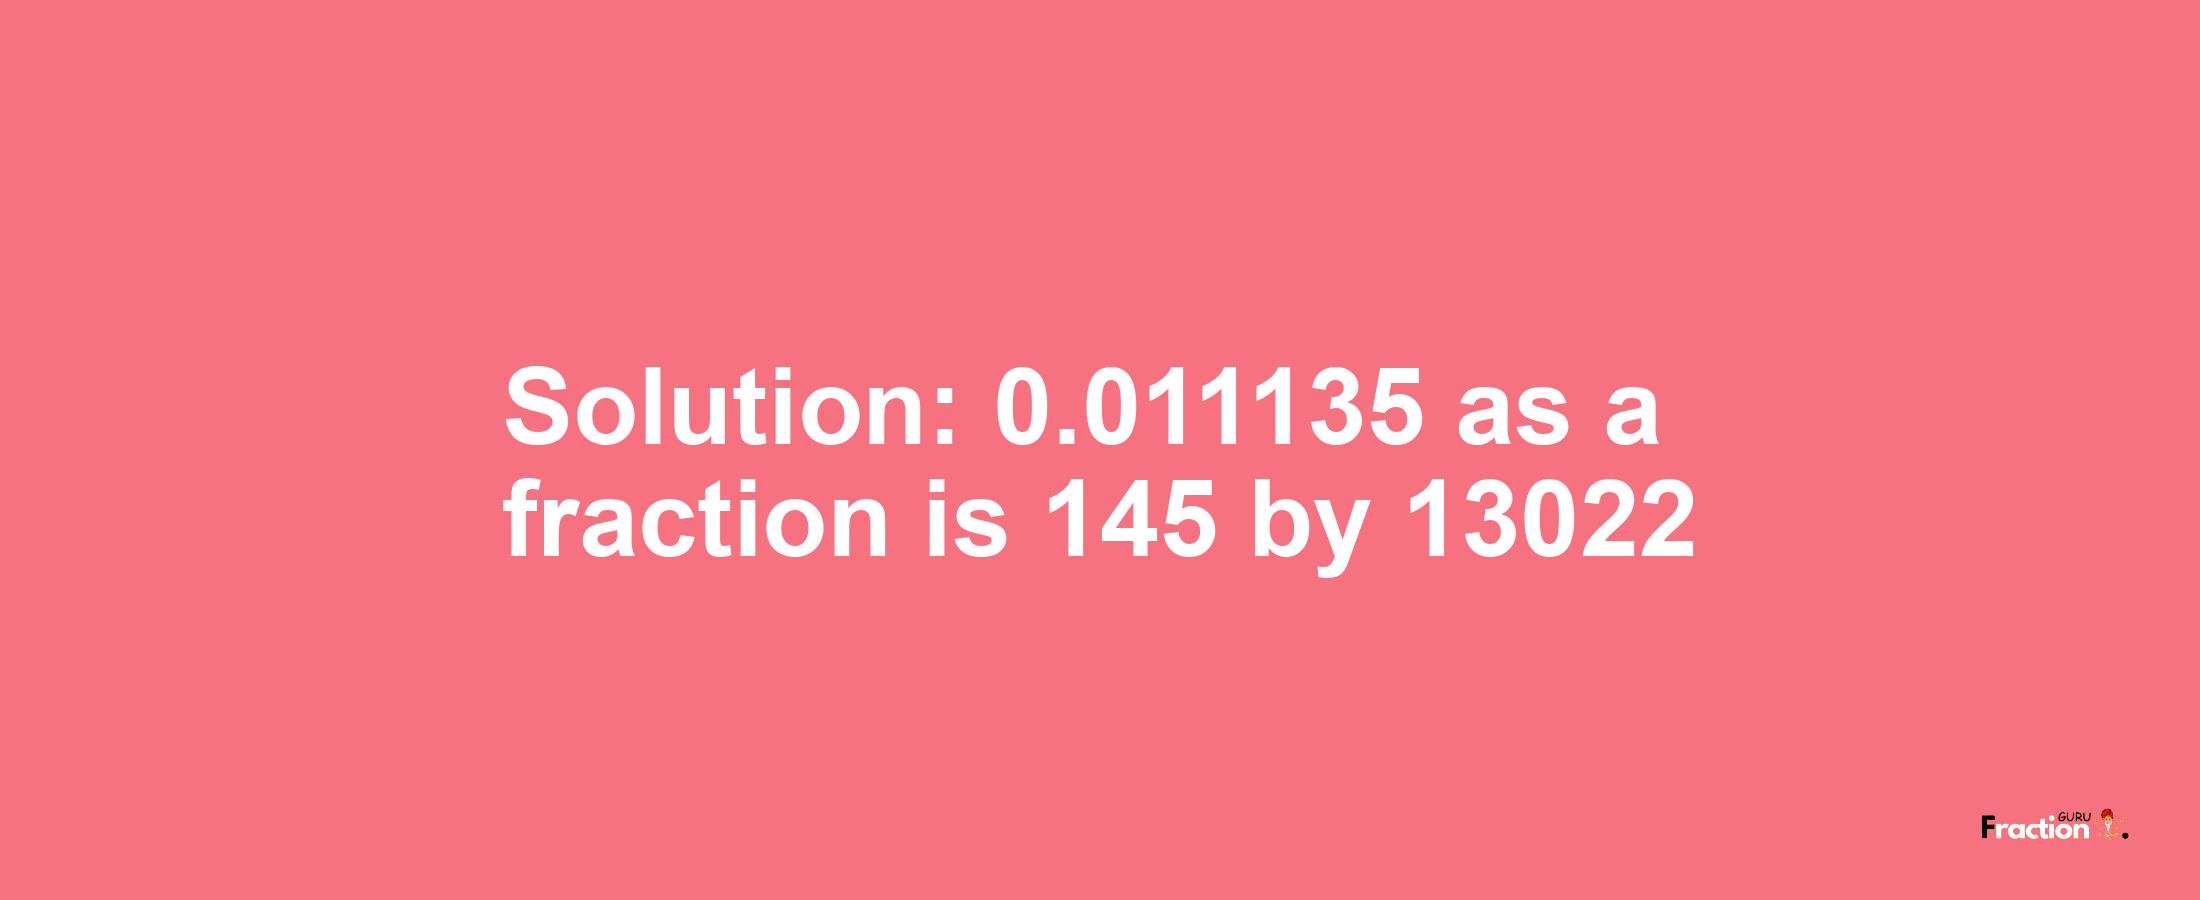 Solution:0.011135 as a fraction is 145/13022